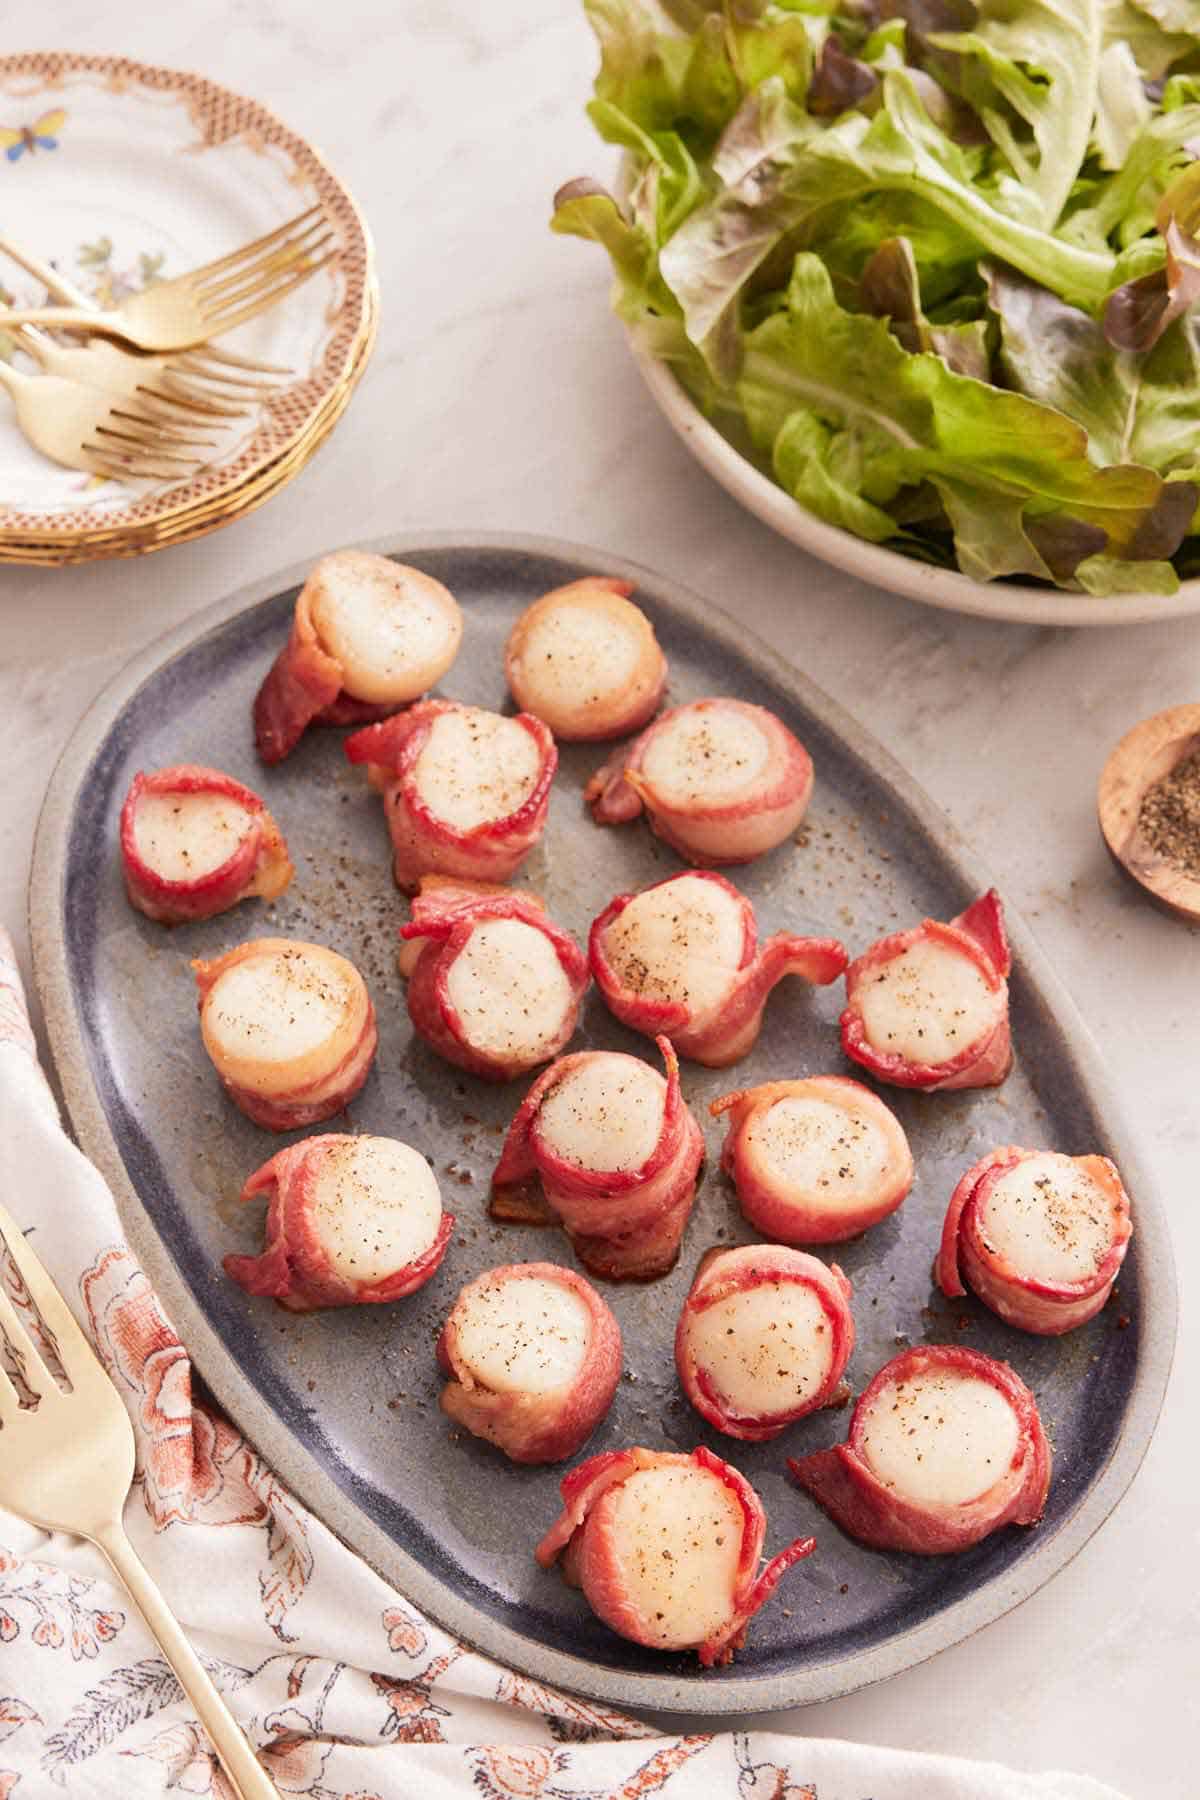 Overhead view of a platter of bacon wrapped scallops with some leafy greens on the side and a stack of plates.